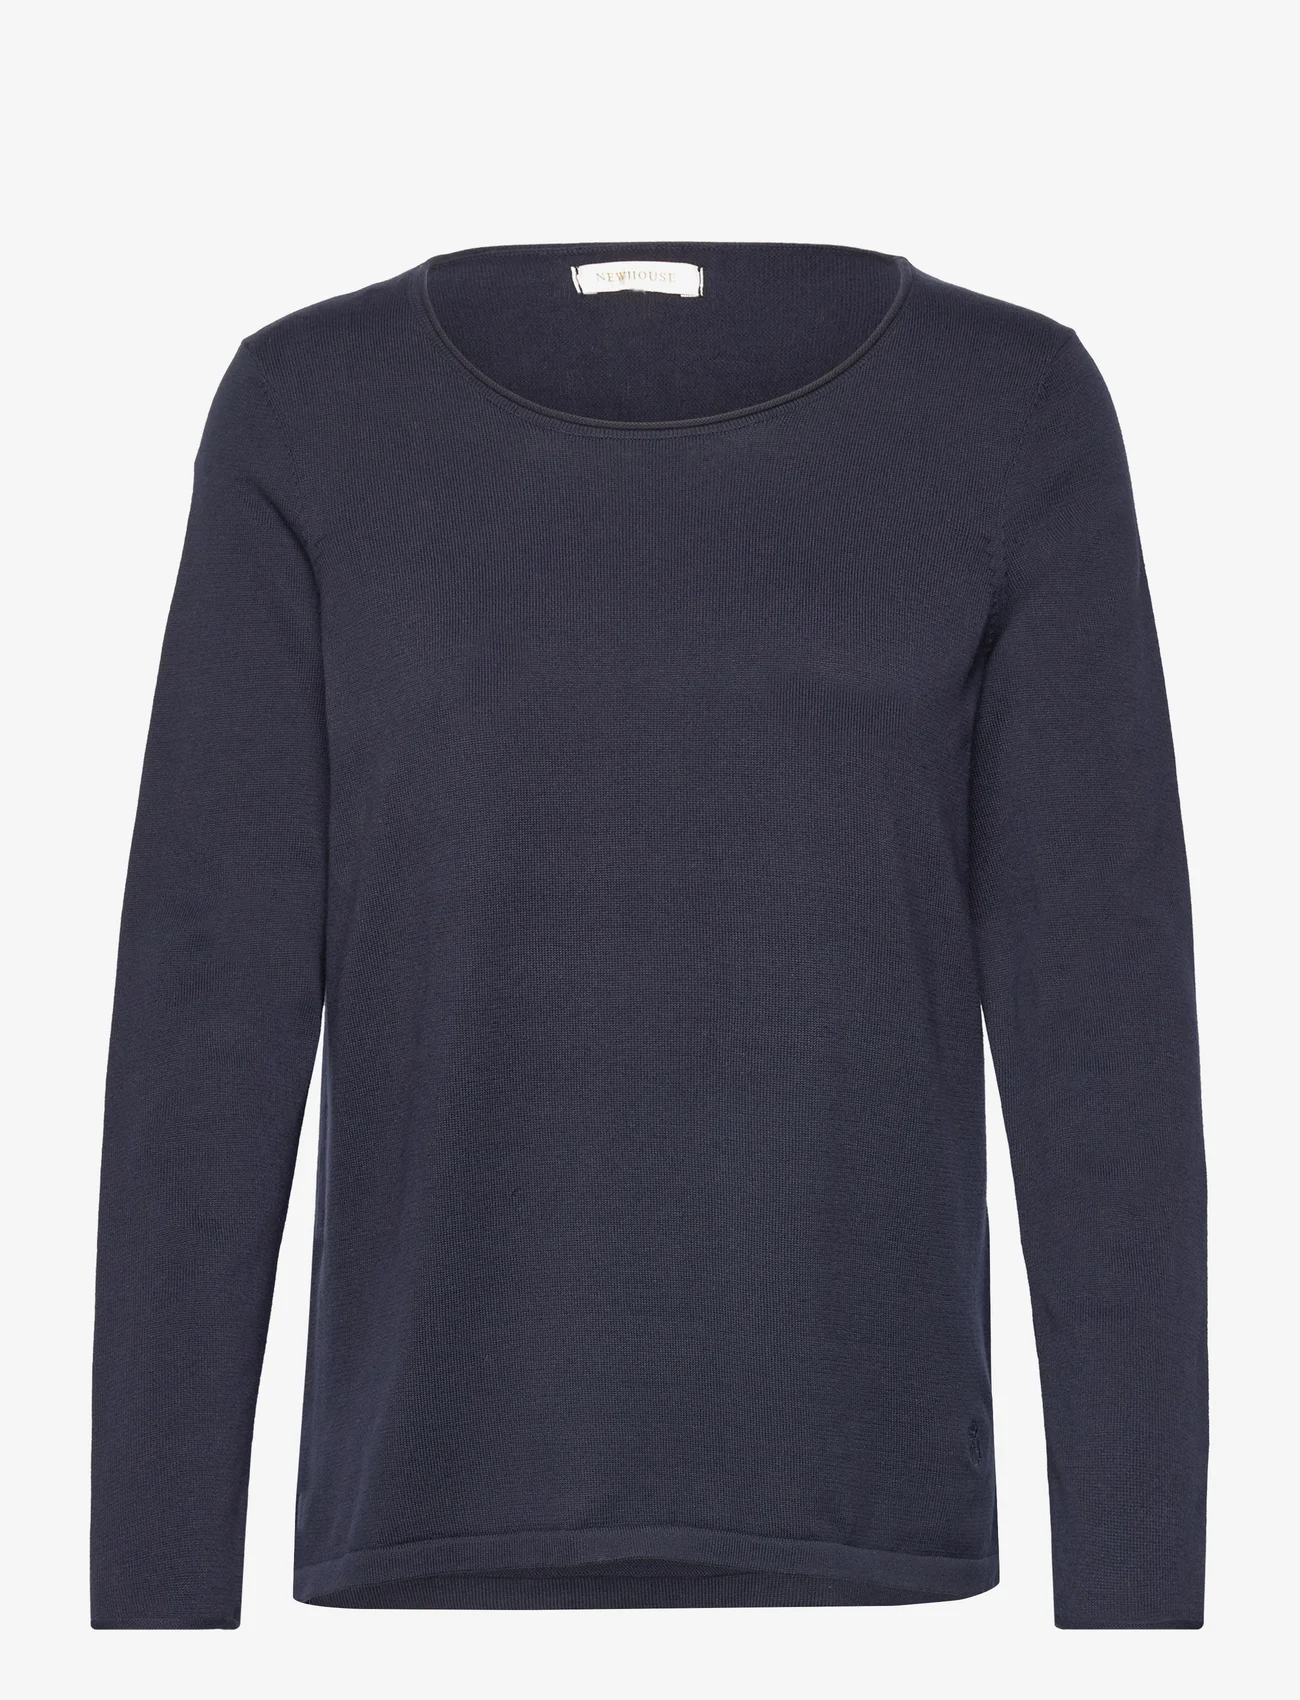 Newhouse - Ebba Sweater - tröjor - navy - 0